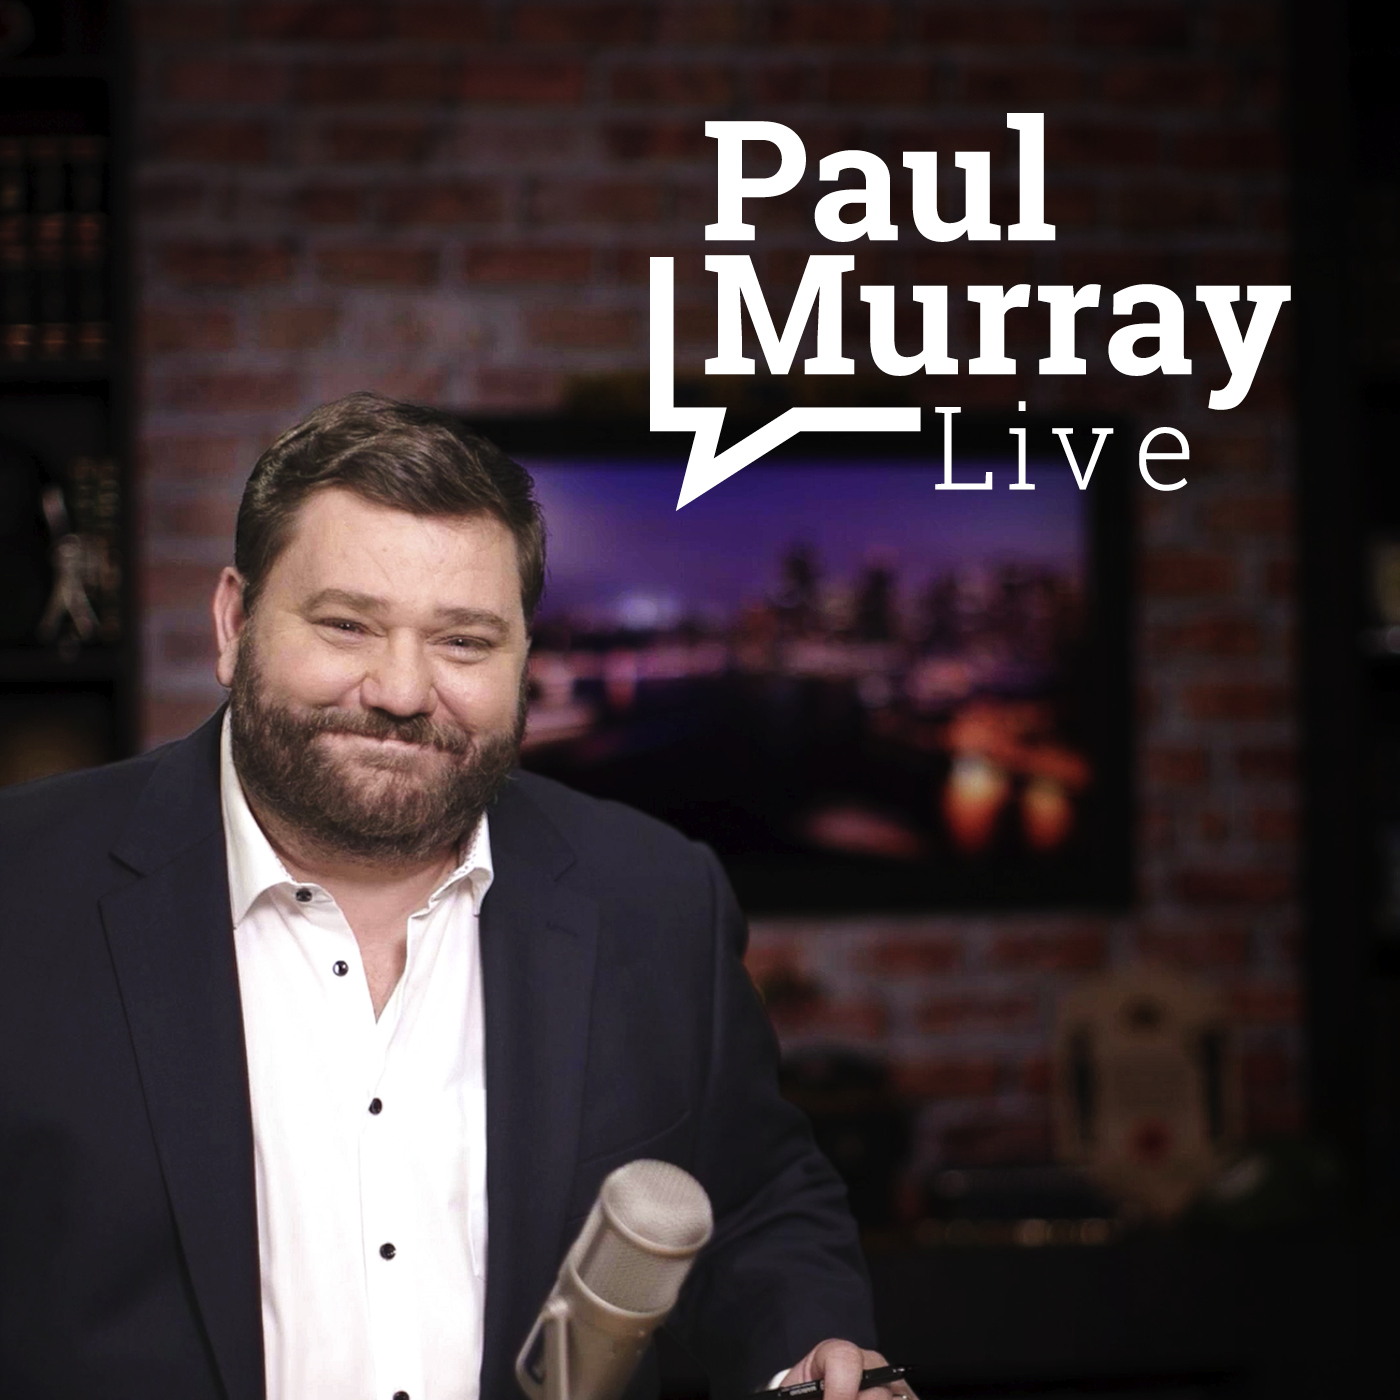 Paul Murray Live, Monday 20 March